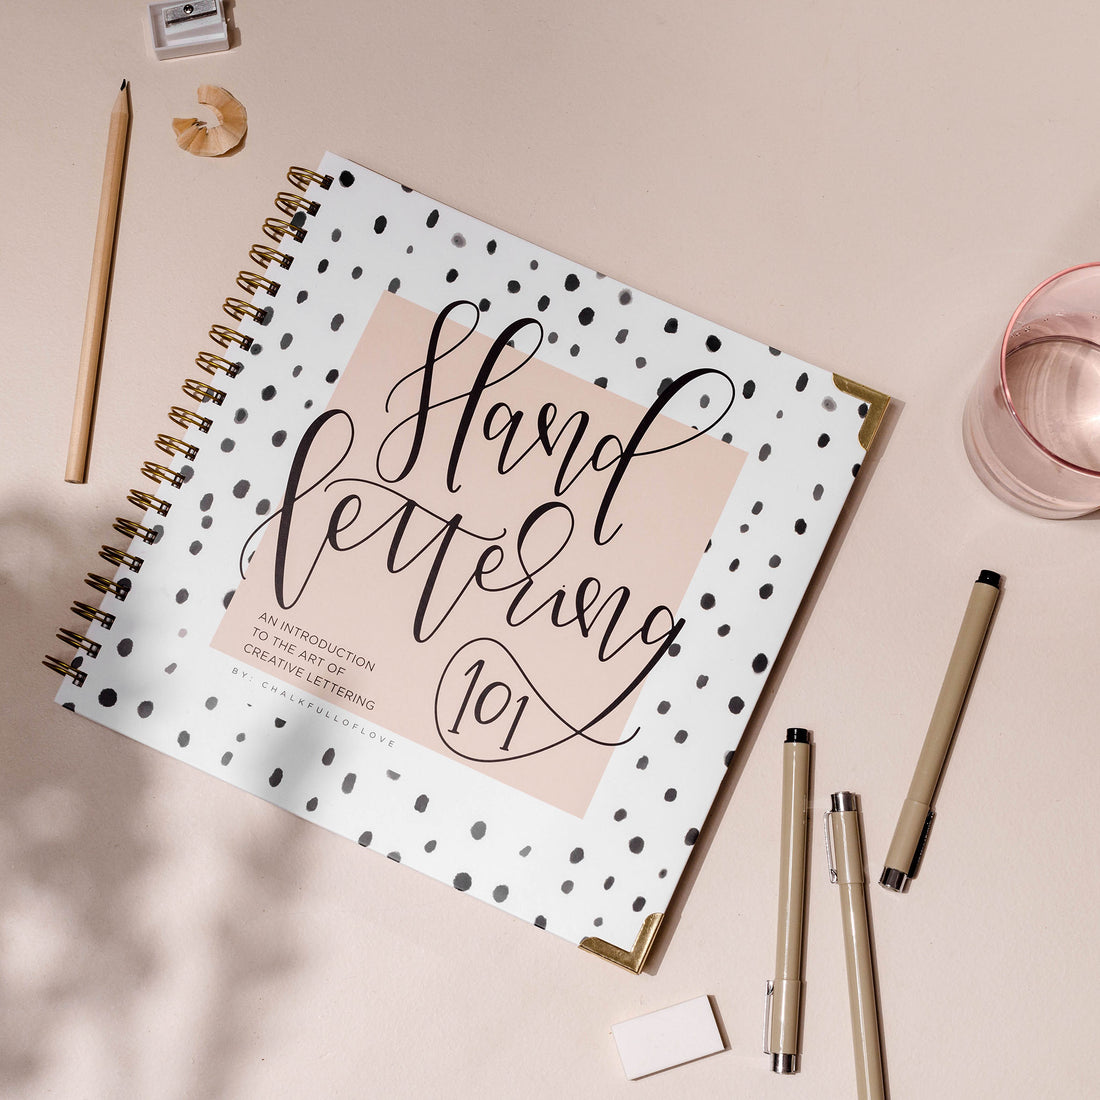 Modern Calligraphy Set for Beginners: A Creative Craft Kit for Adults